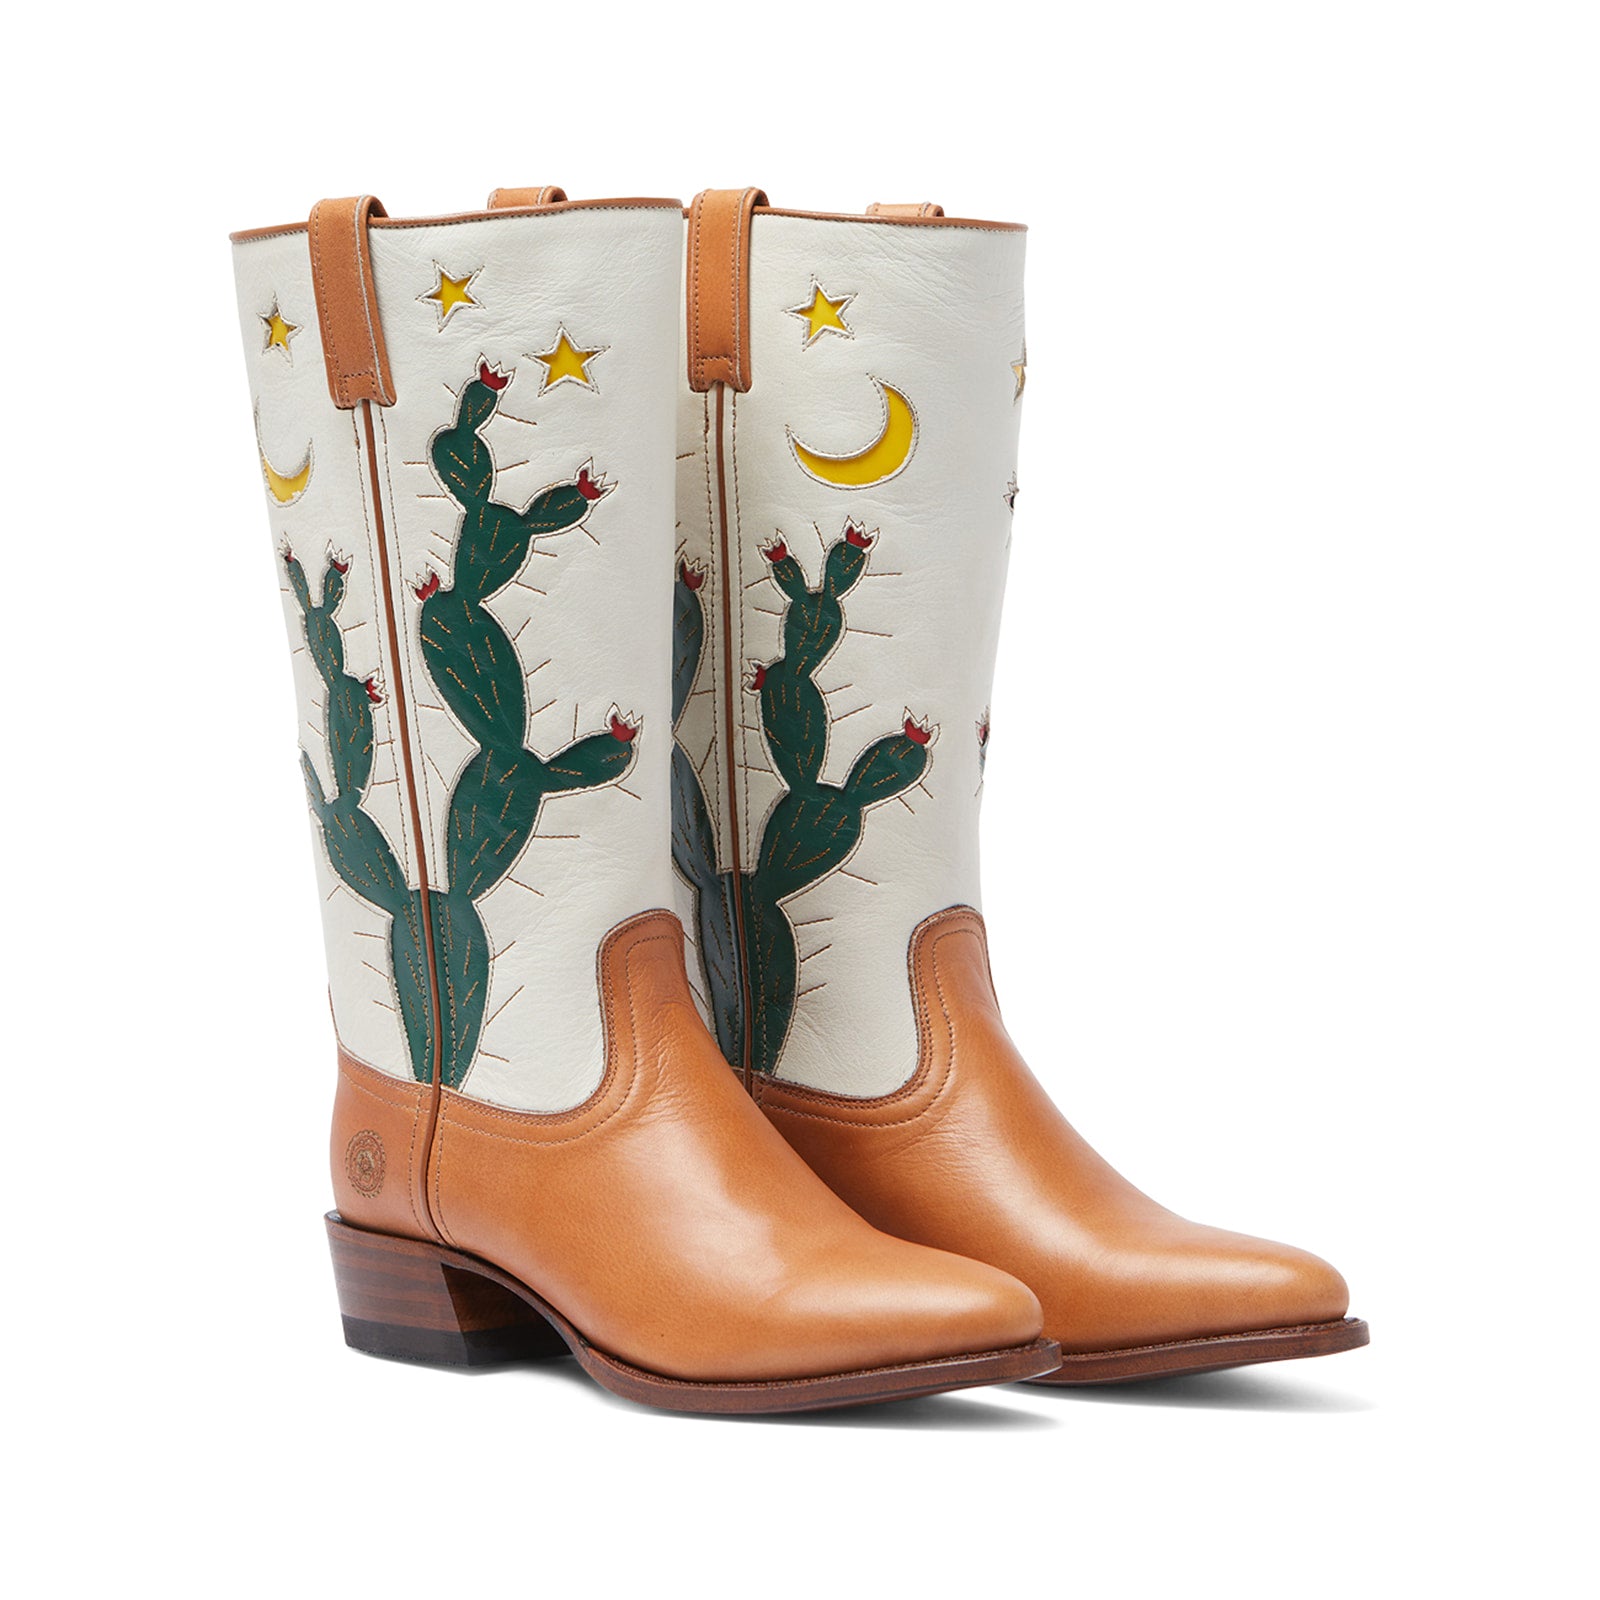 ARCHER PRICKLY TALL_WOMEN'S WESTERN_BOOT PAIR